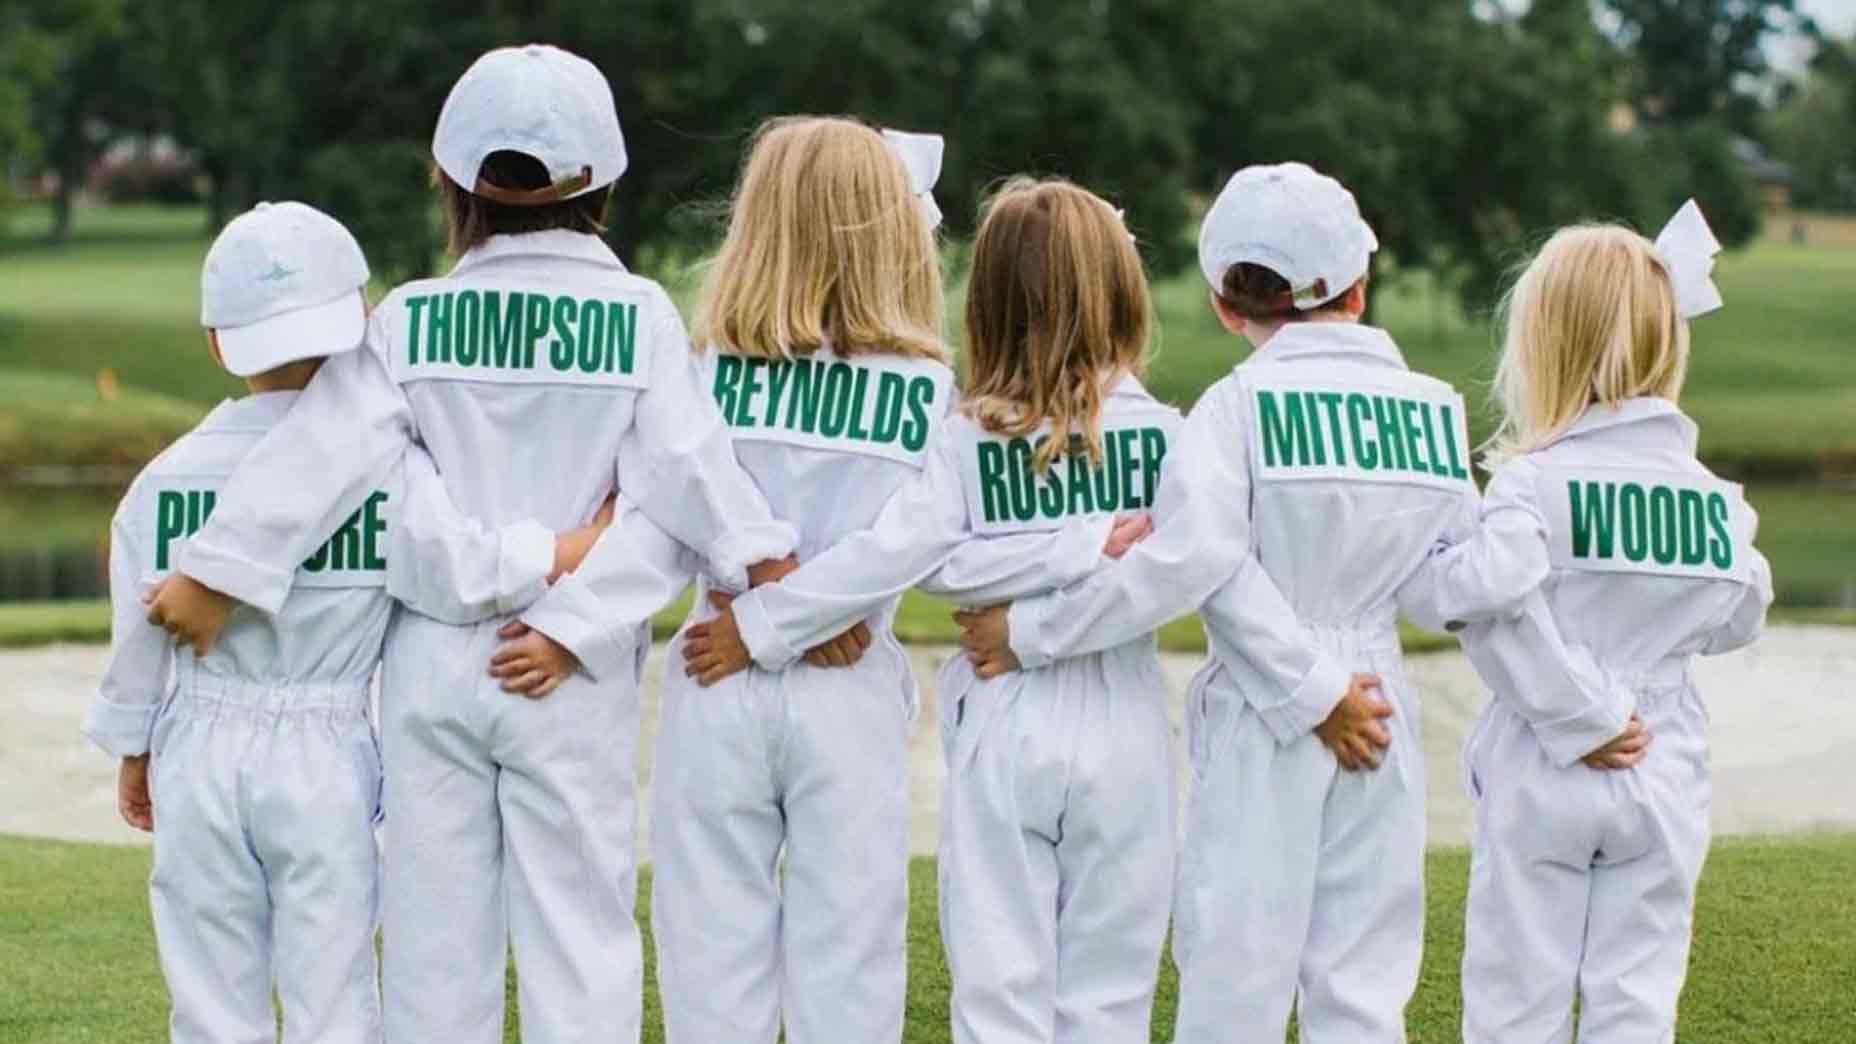 This caddie jumpsuit for kids is the ultimate Masters outfit